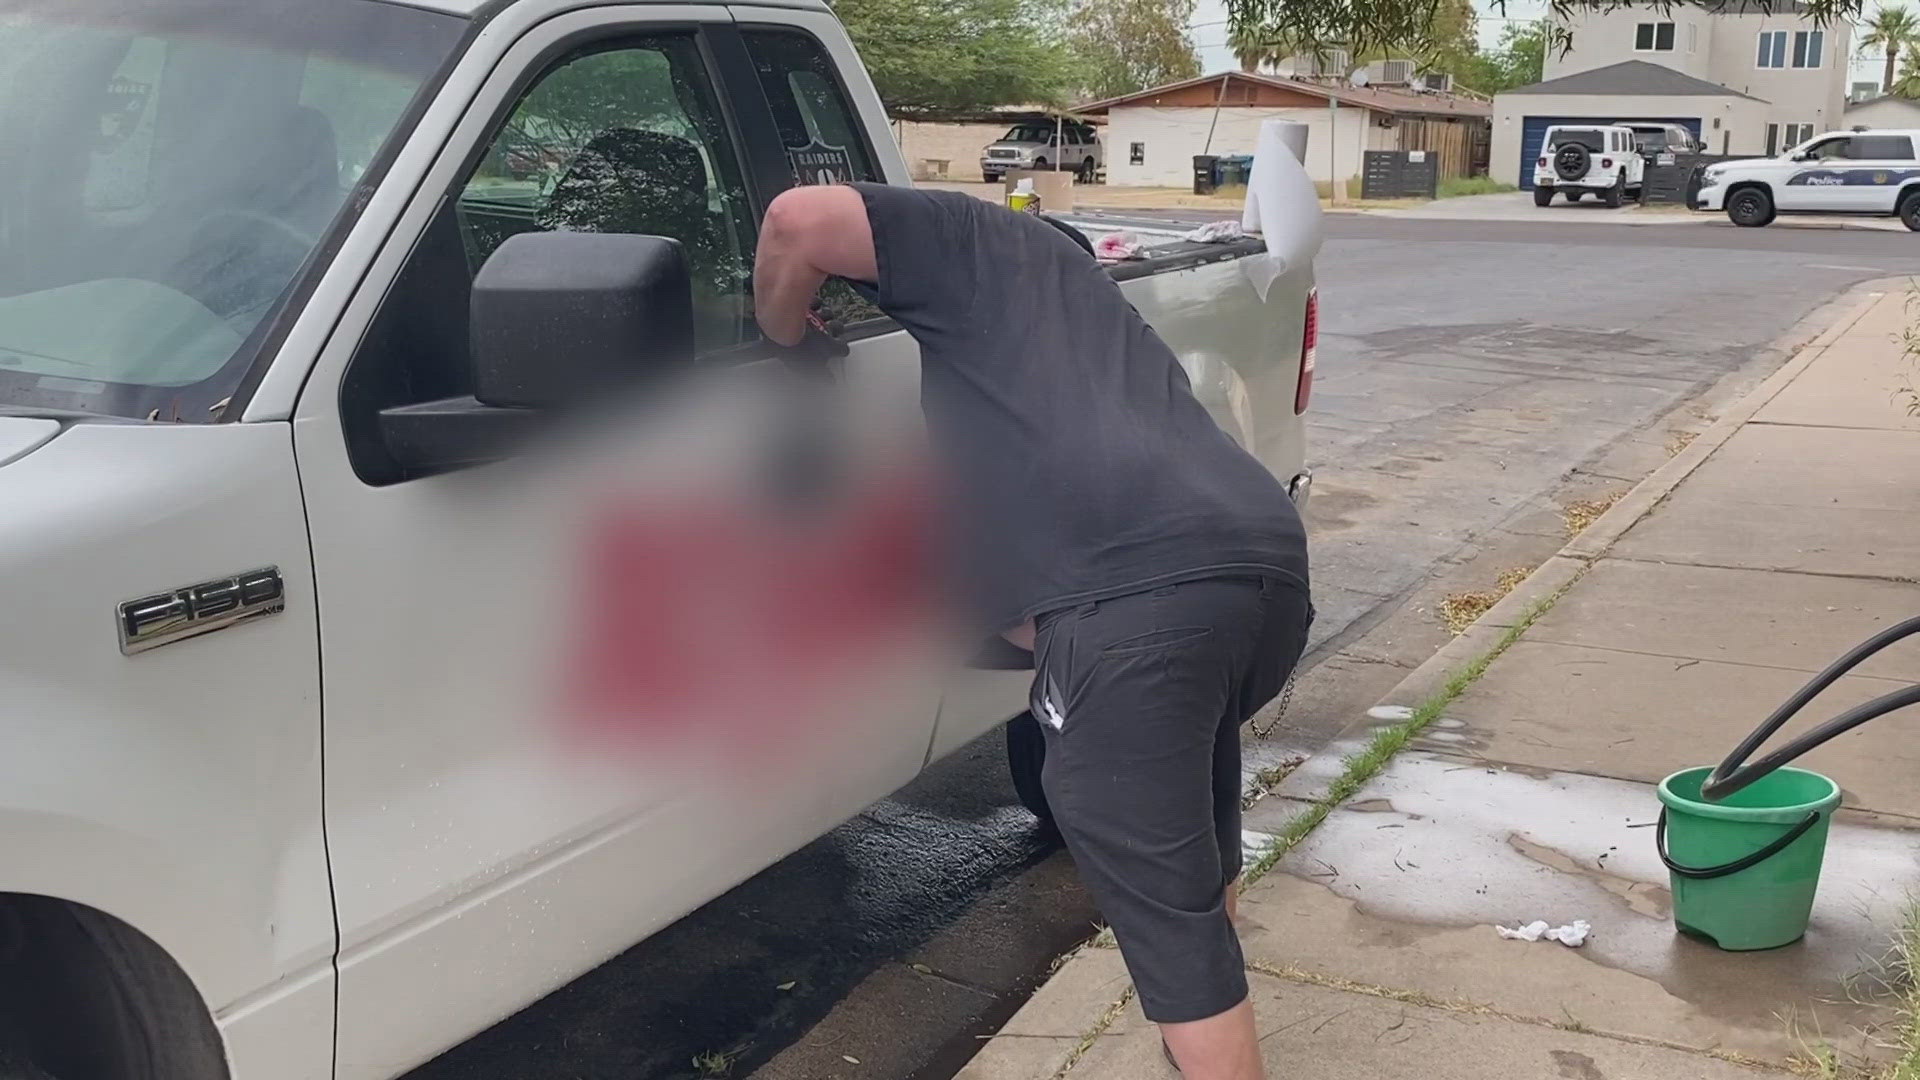 Neighbors in a neighborhood near 24th Street and McDowell in Phoenix react after their cars were spray-painted with racial slurs for the 2nd time in a week.